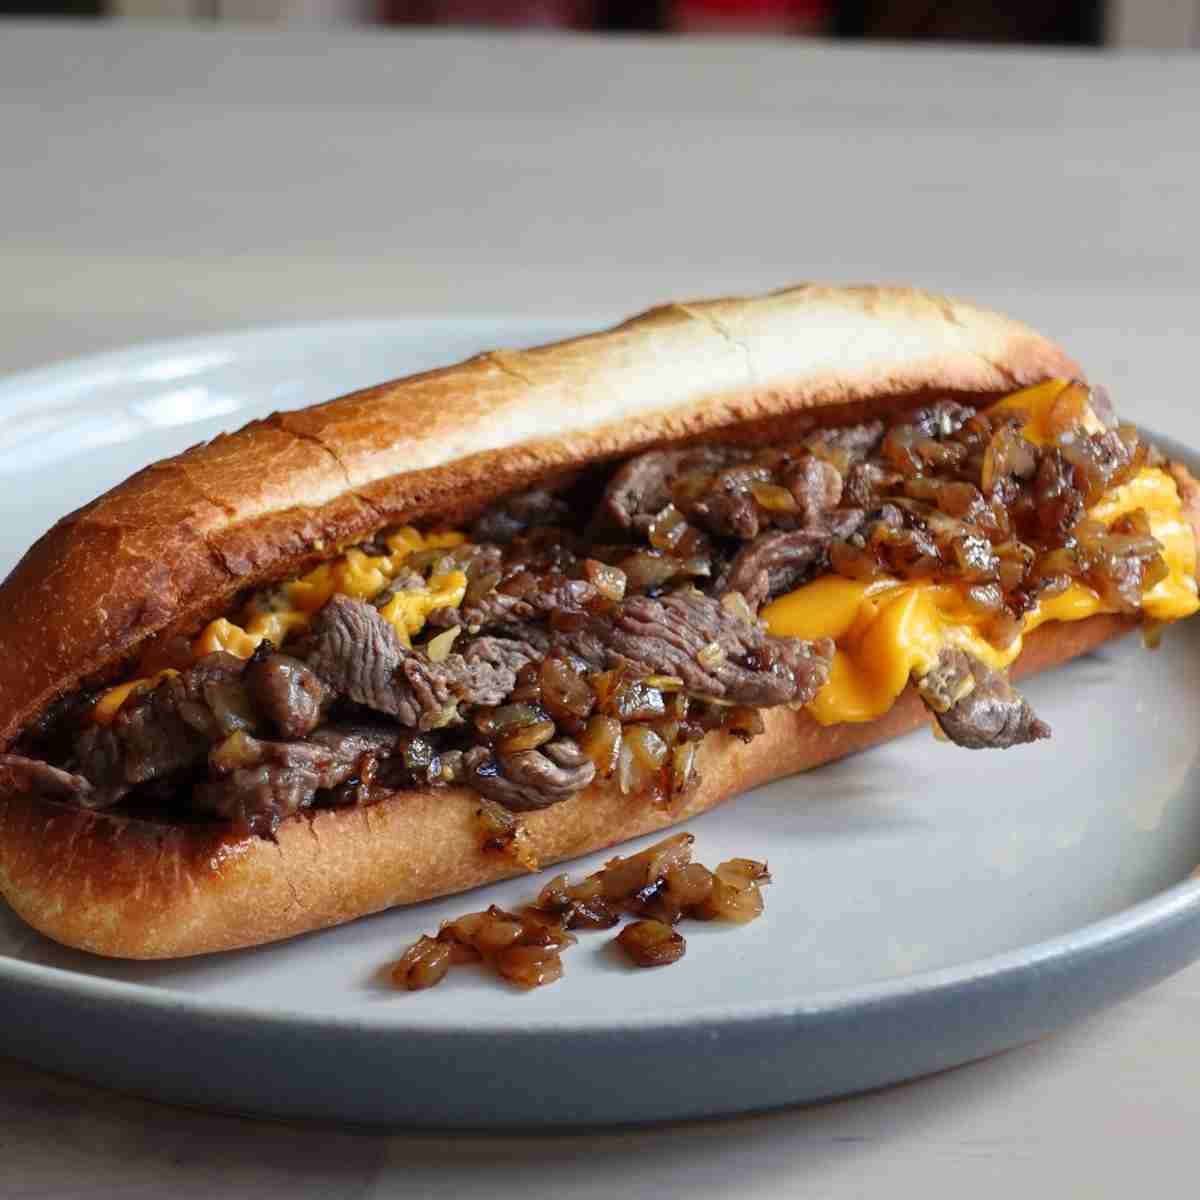 American cheese philly cheesesteak at home